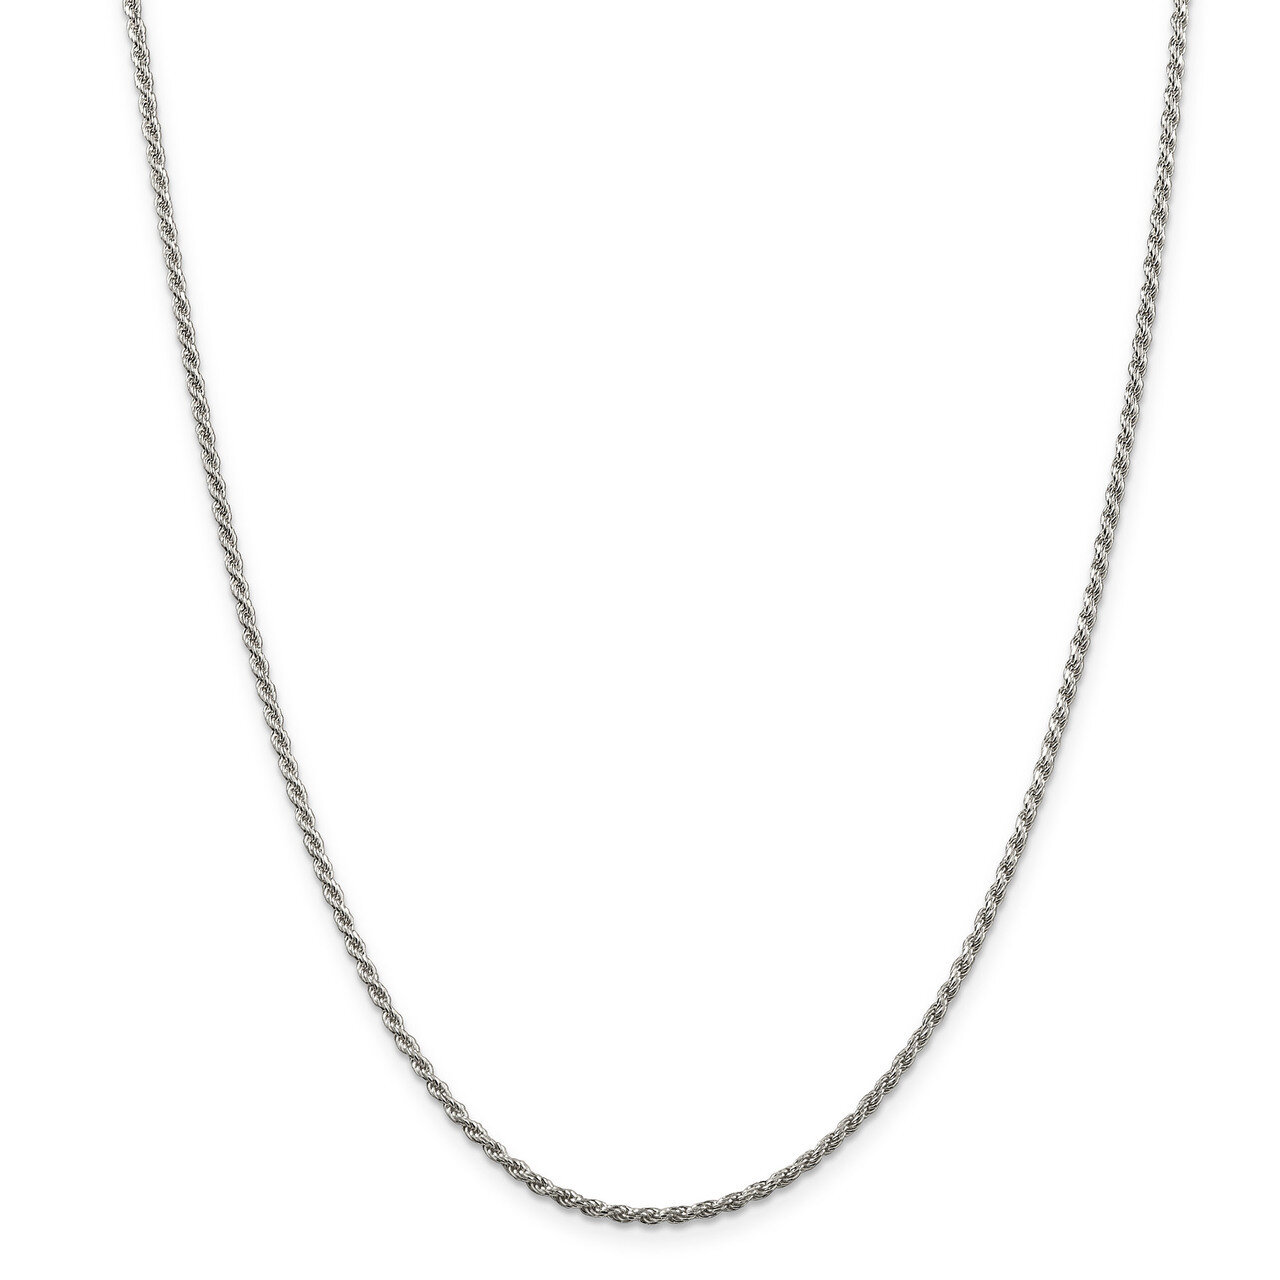 28 Inch 1.75mm Diamond-cut Rope Chain Sterling Silver QDC030-28